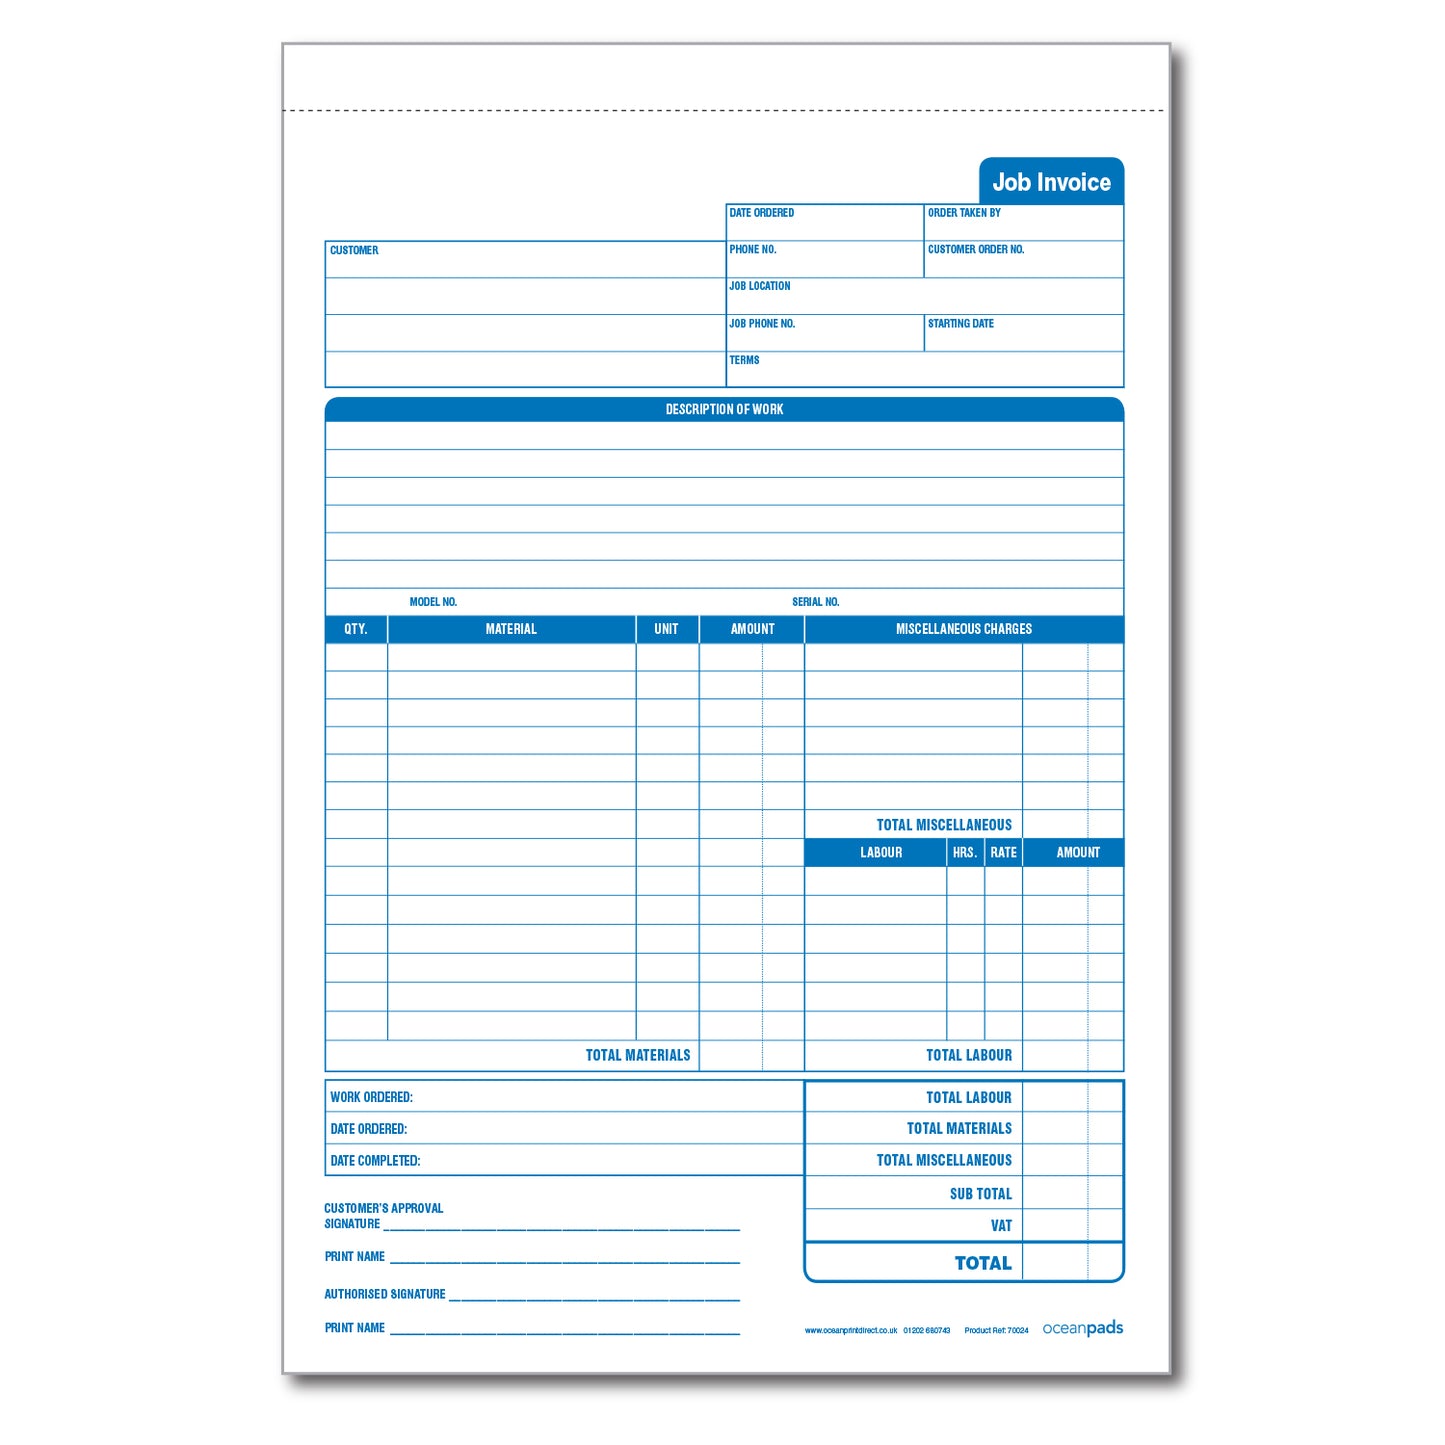 Job Invoice Book for Service and Repair Businesses, A4, Duplicate